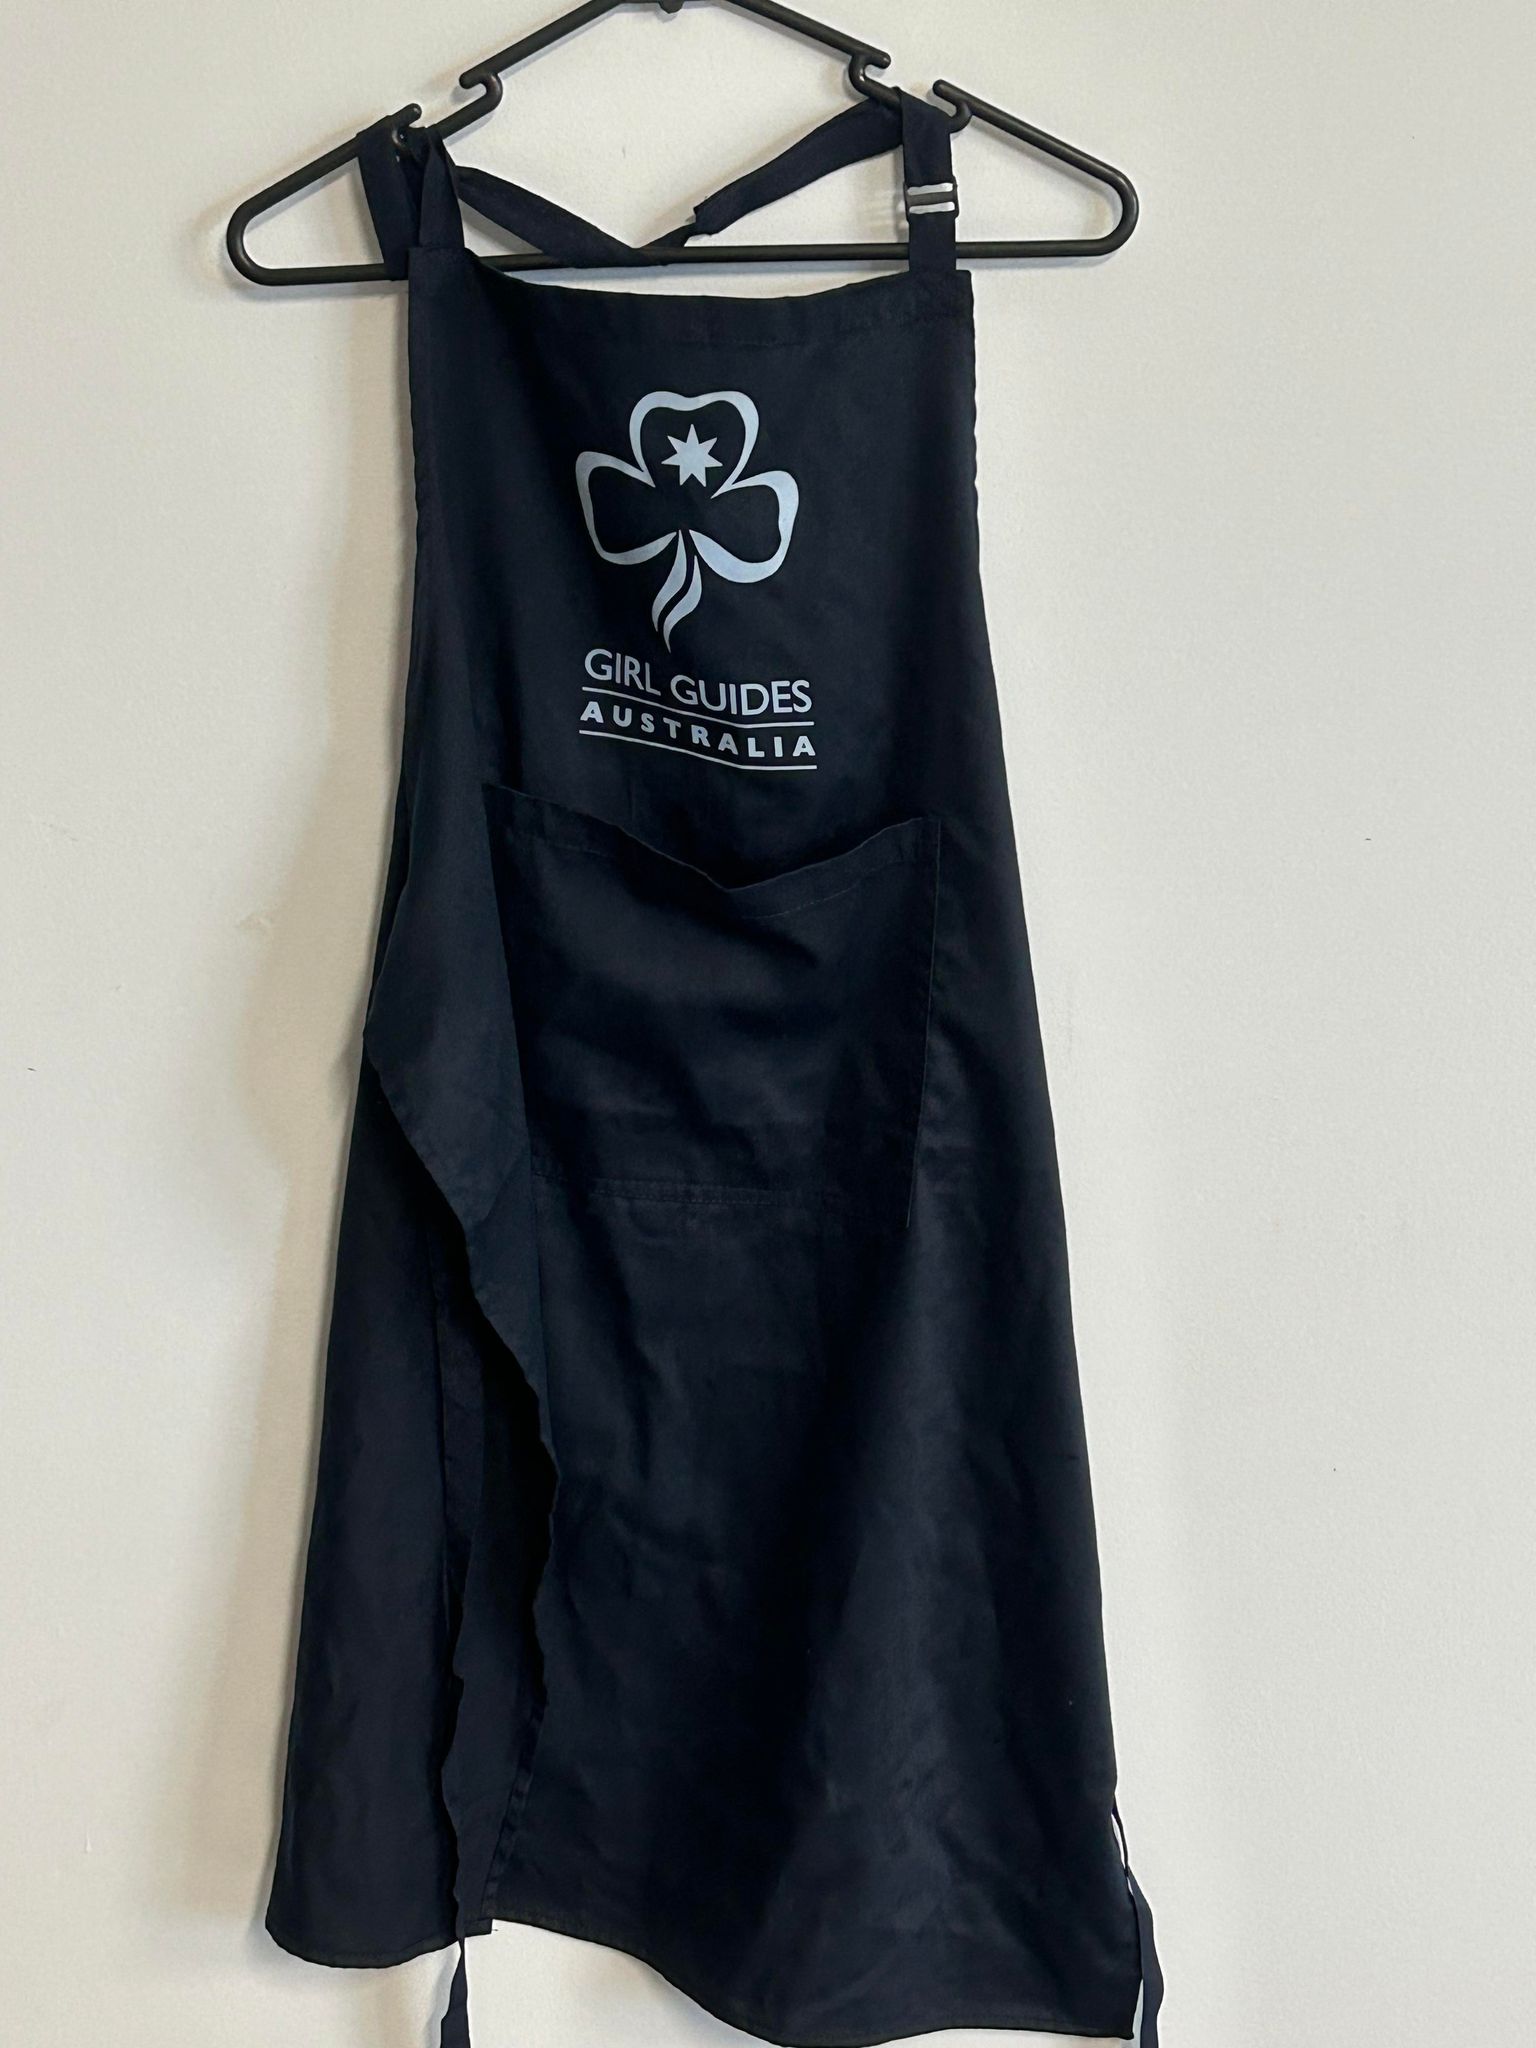 a navy blue apron with a trefoil and girl guides Australia on the front